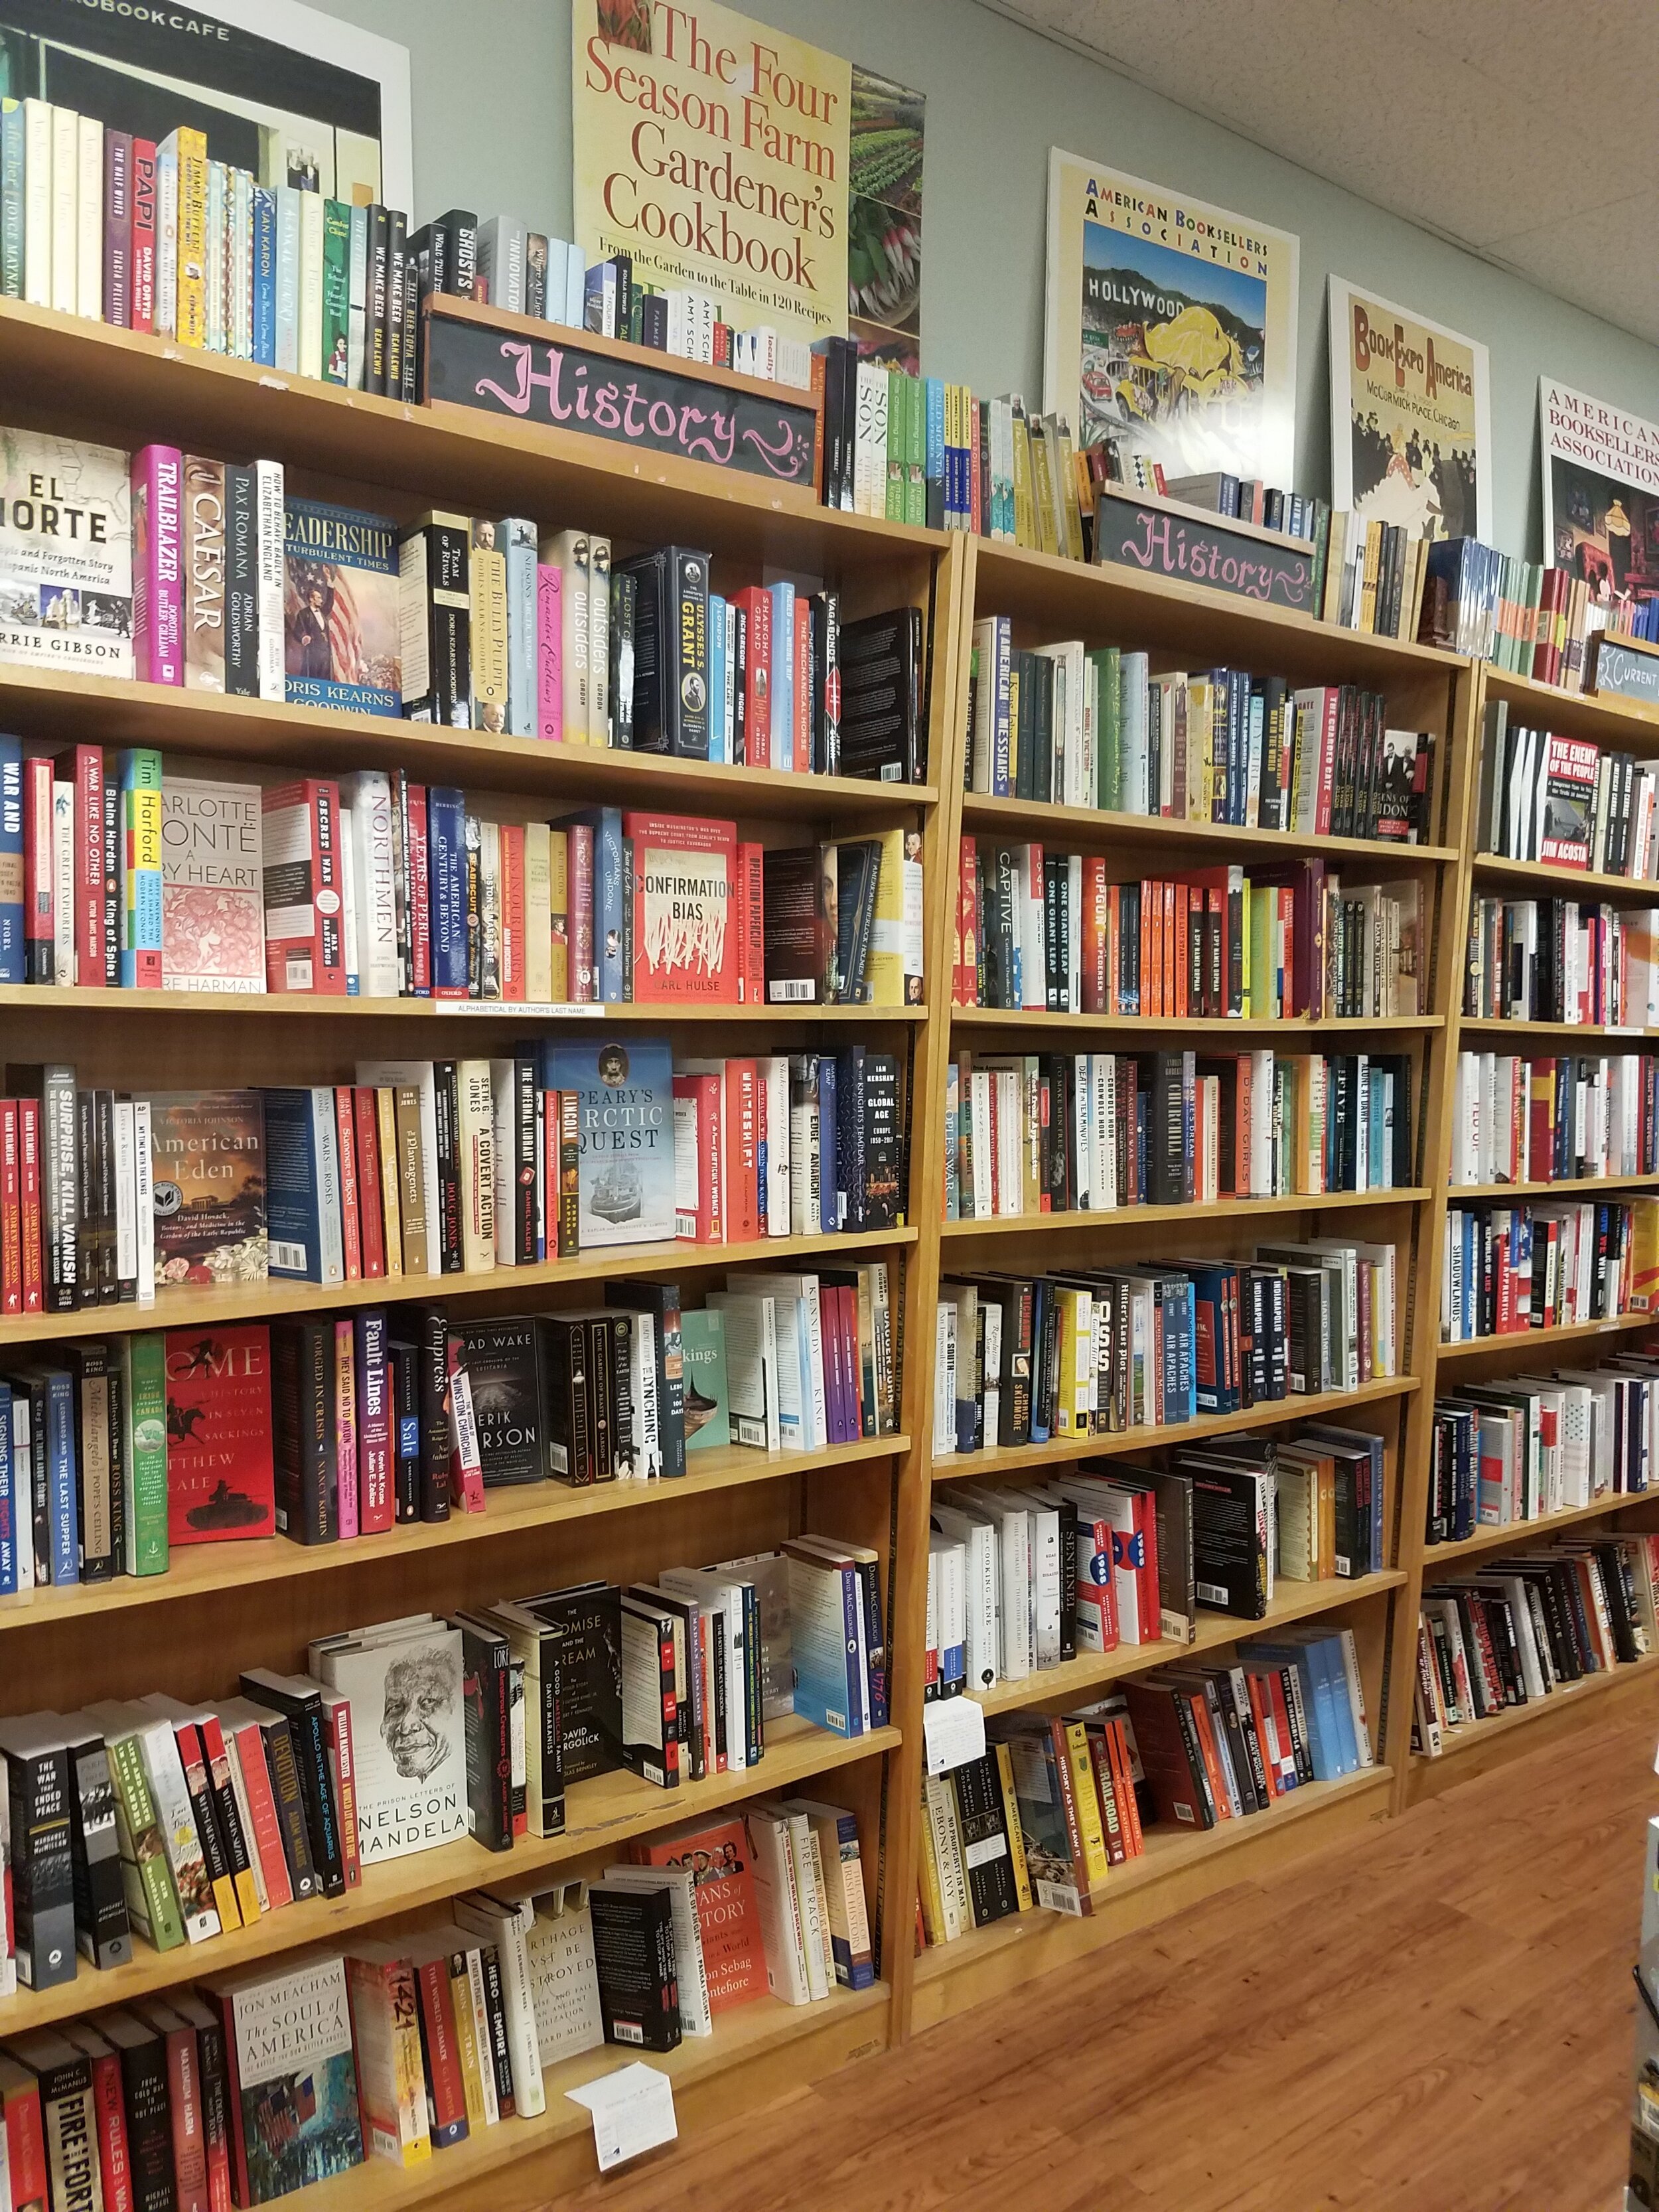 Maine Coast Book Shop and Cafe - All You Need to Know BEFORE You